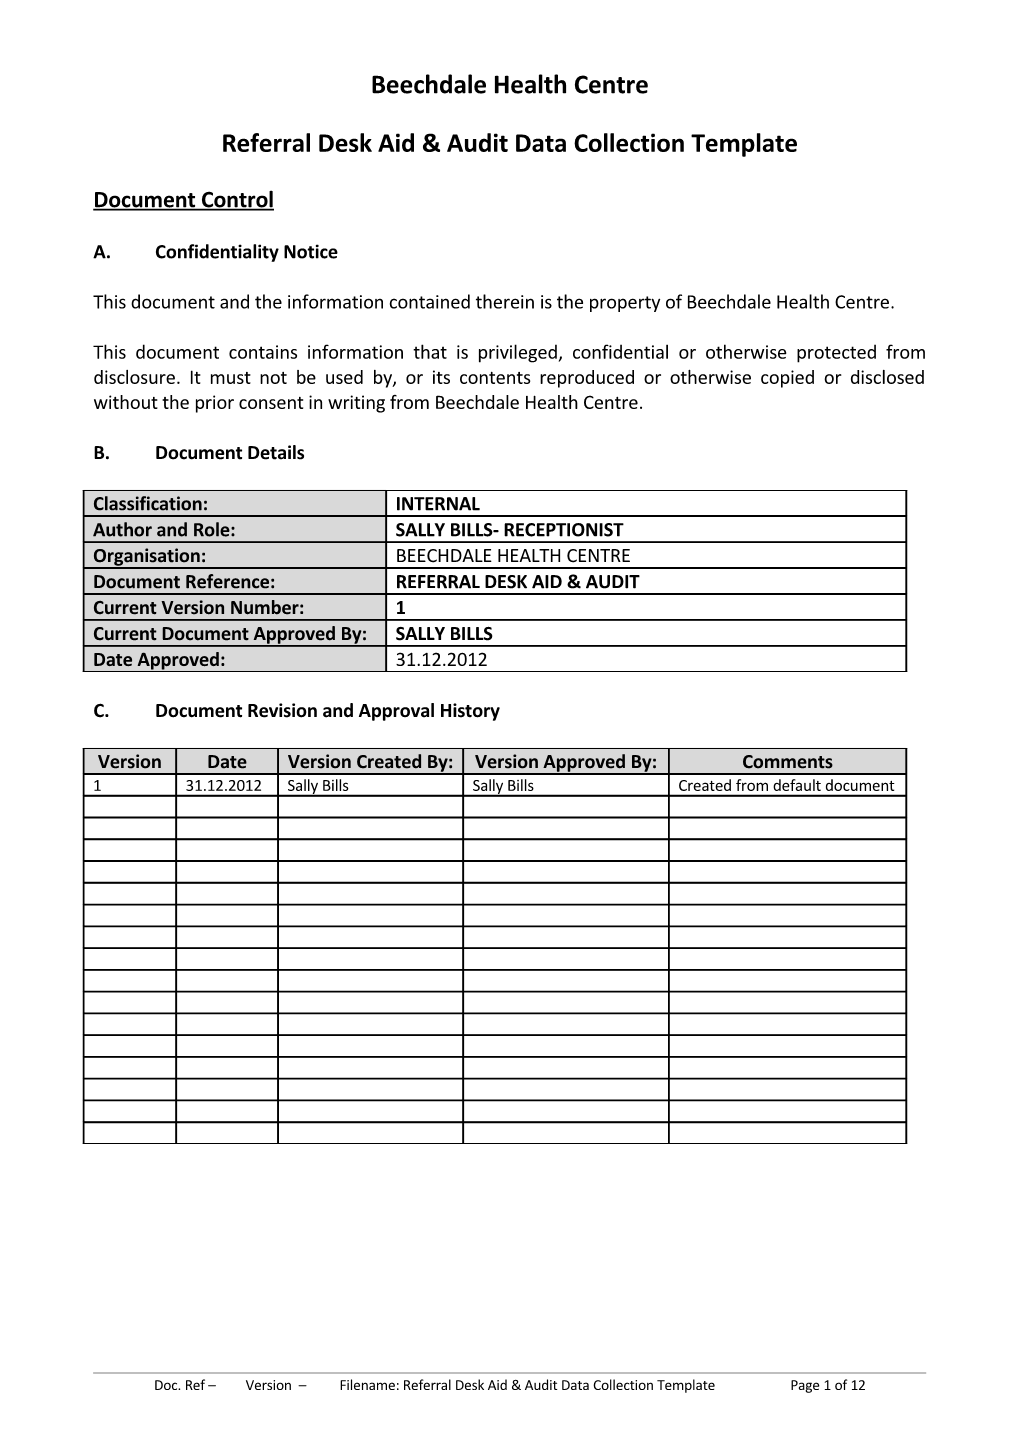 Referral Desk Aid & Audit Data Collection Template